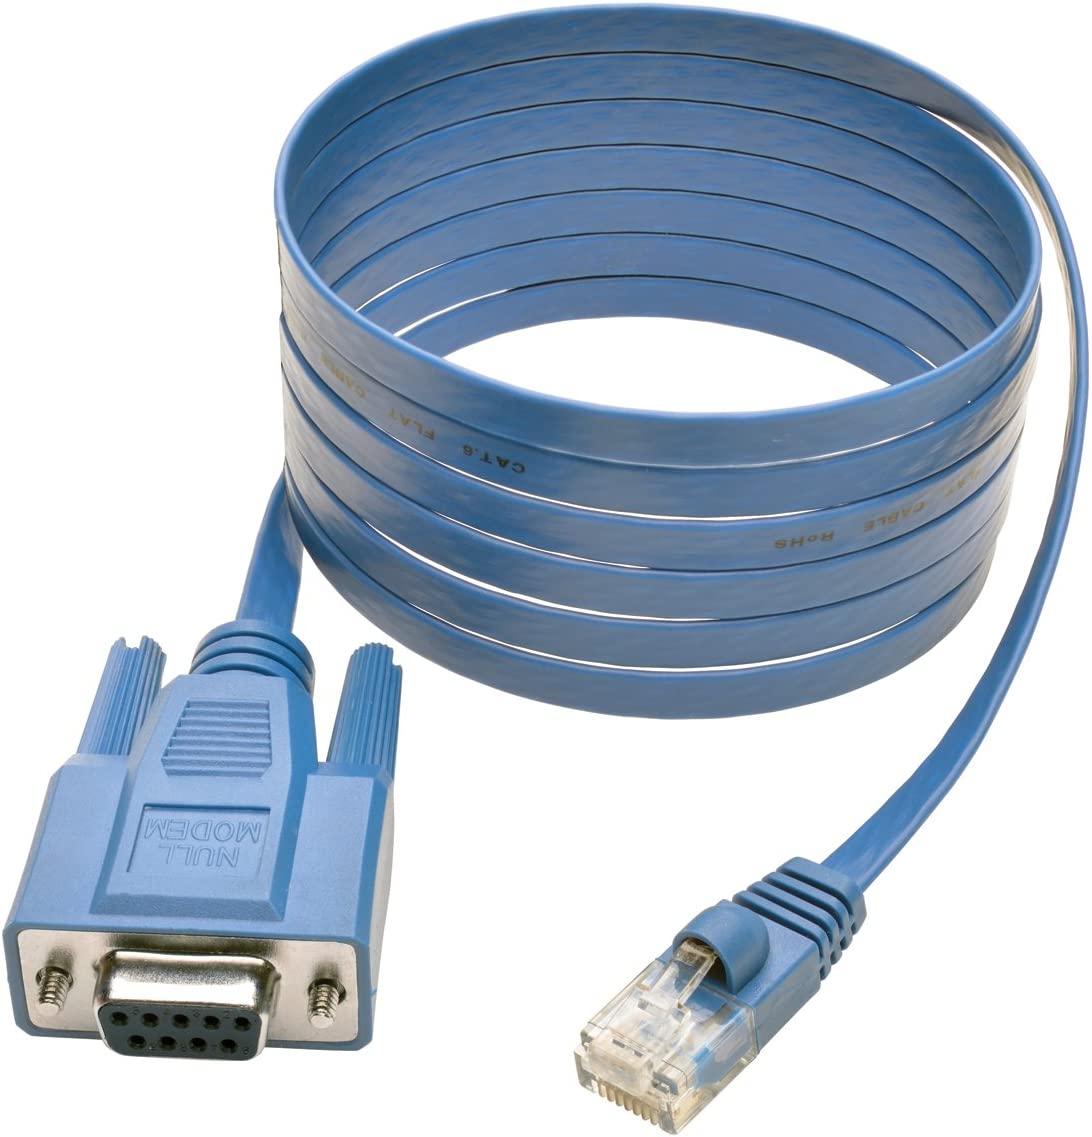 TRIPP LITE RJ45 to DB9F Cisco Serial Console Port Rollover Cable 6' 6ft